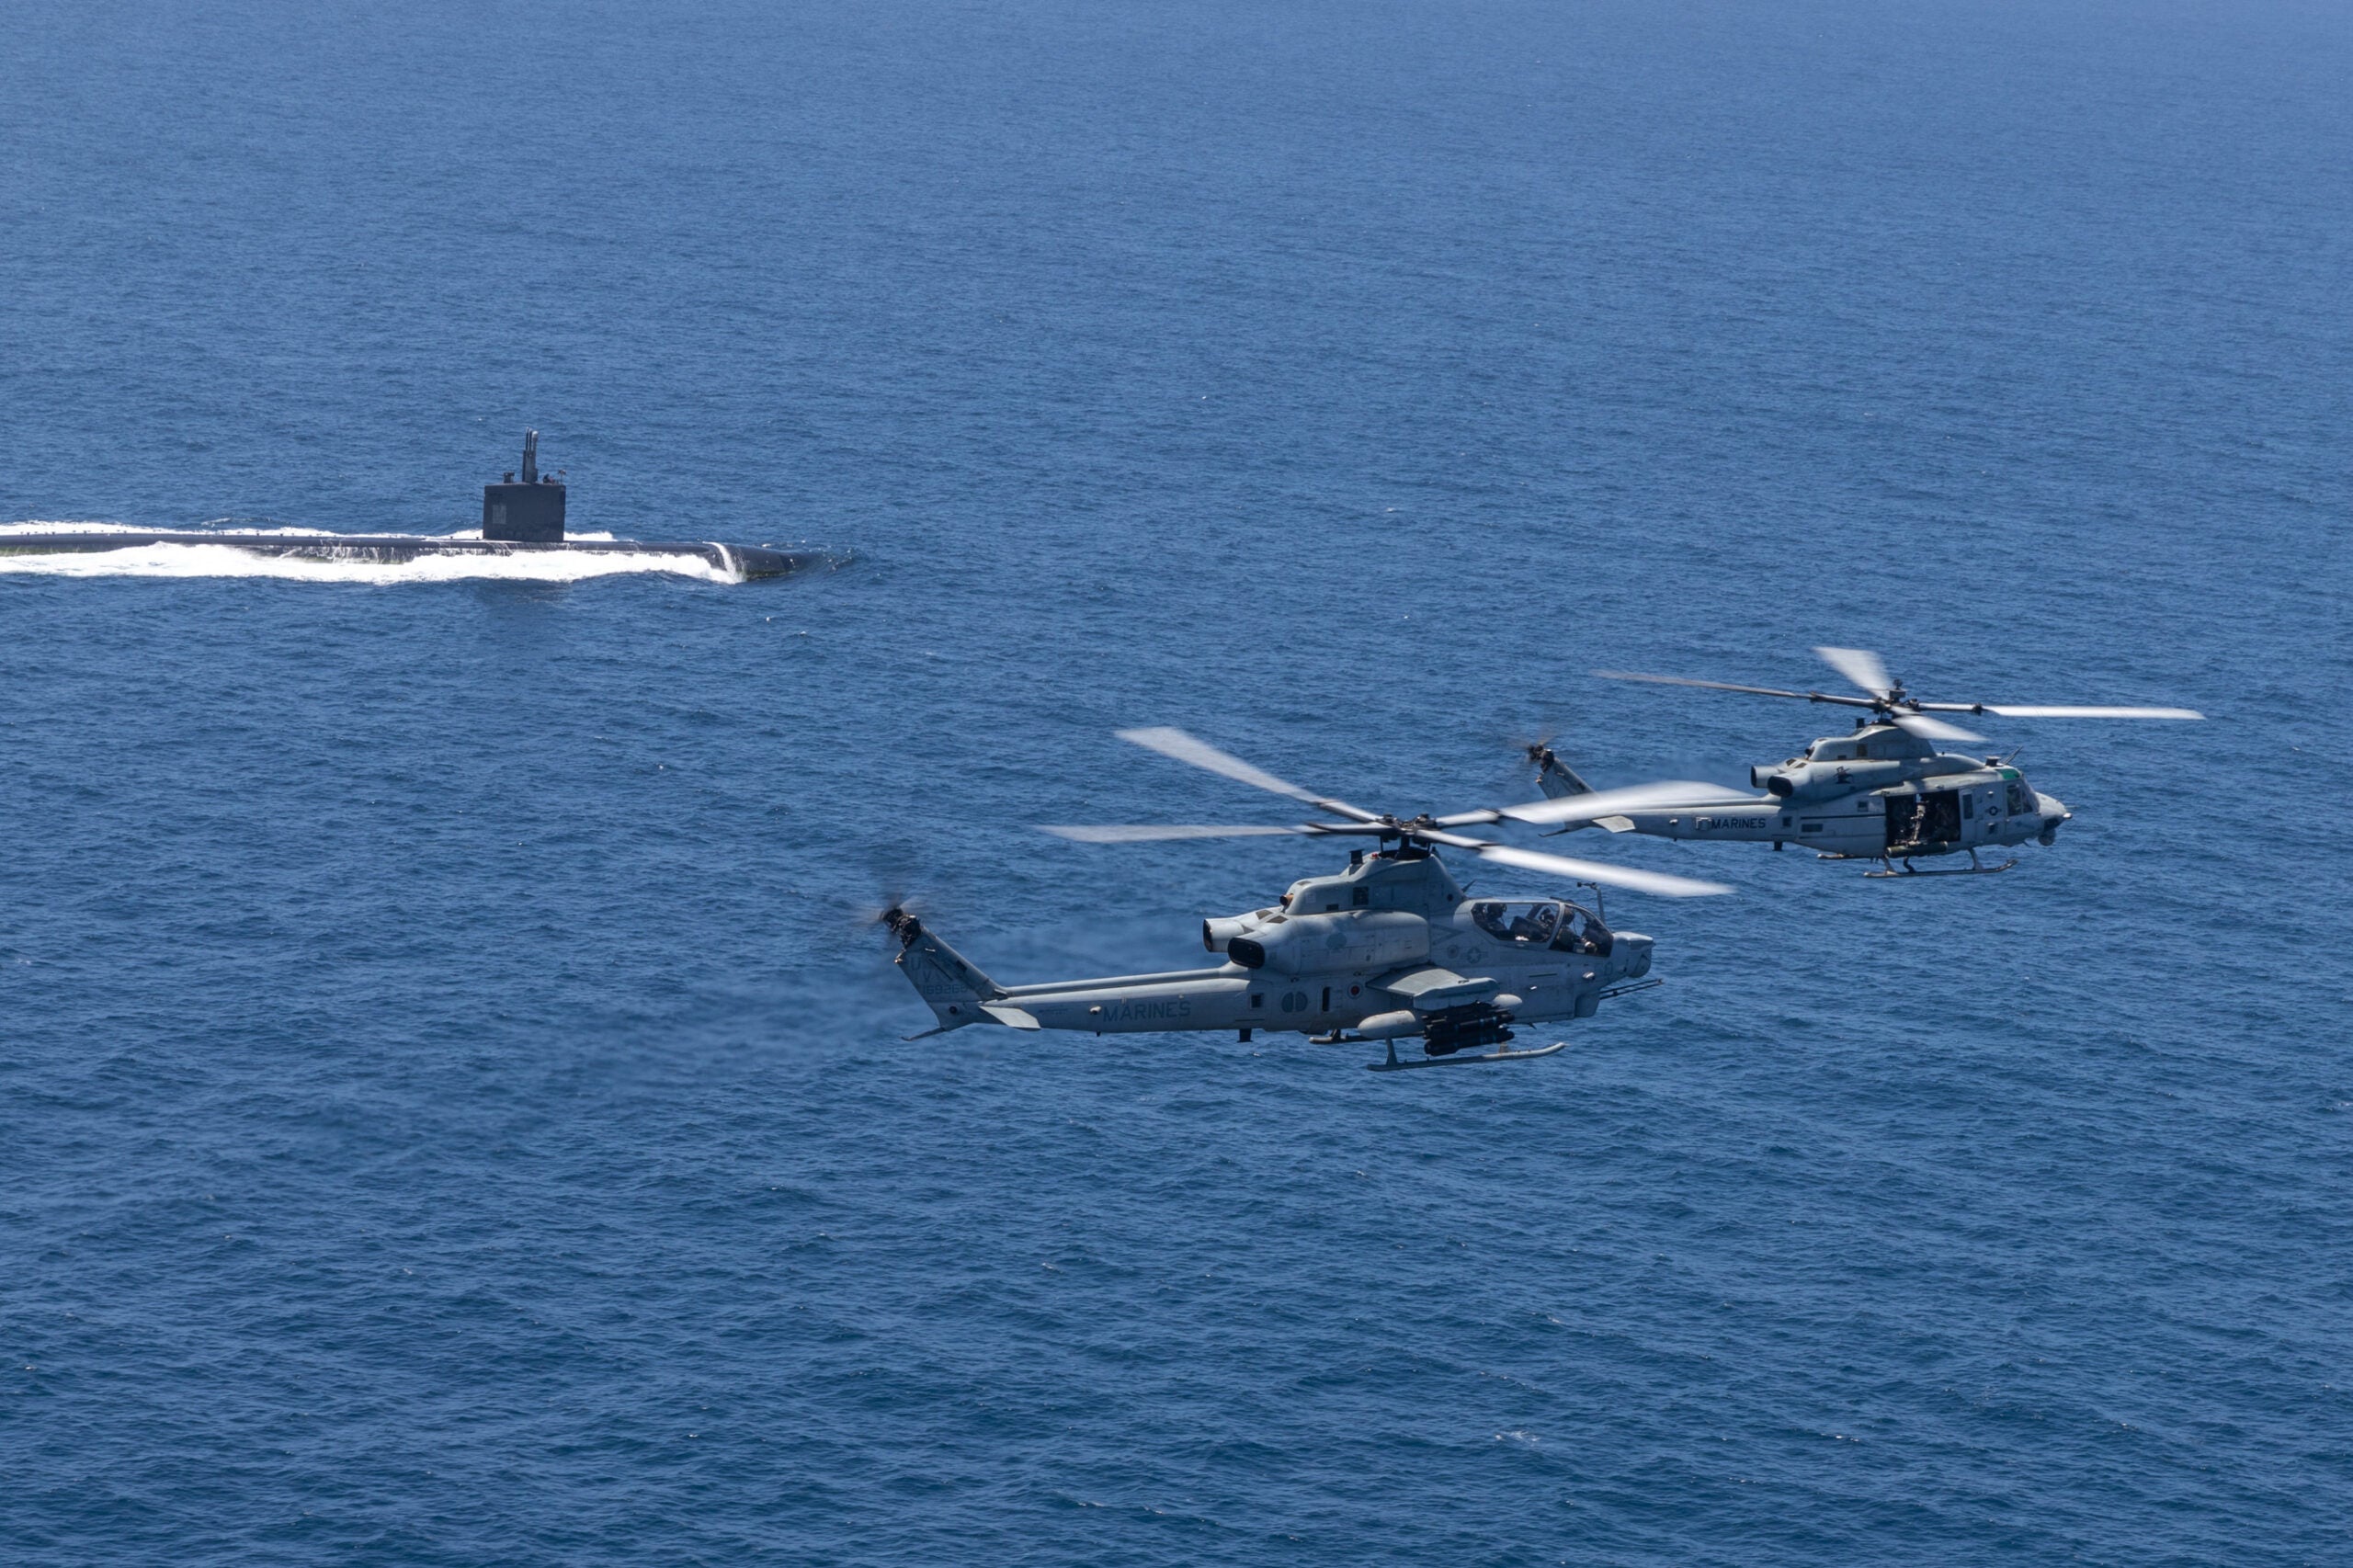 U.S. Marine Corps AH-1Z Viper and UH-1Y Venom with Marine Light Attack Helicopter Squadron 267, Marine Aircraft Group 16, 3rd Marine Aircraft Wing (MAW), fly over a U.S. Navy Submarine during Advanced Naval Basing evolution of Summer Fury 21 at San Clemente, California, July 20, 2021. Advanced Naval Basing offering forward logistics and support, as well as sensor and strike capabilities that make a significant contribution to undersea warfare campaigns in the Indo-Pacific region. Summer Fury is an exercise conducted by 3rd MAW in order to maintain and build capability, strength and trust within its units to generate the readiness and lethality needed to deter and defeat adversaries during combat operations as the U.S. Marine Corps refines tactics and equipment in accordance with Force Design 2030. (U.S. Marine Corps photo by Lance Cpl. Isaac Velasco)